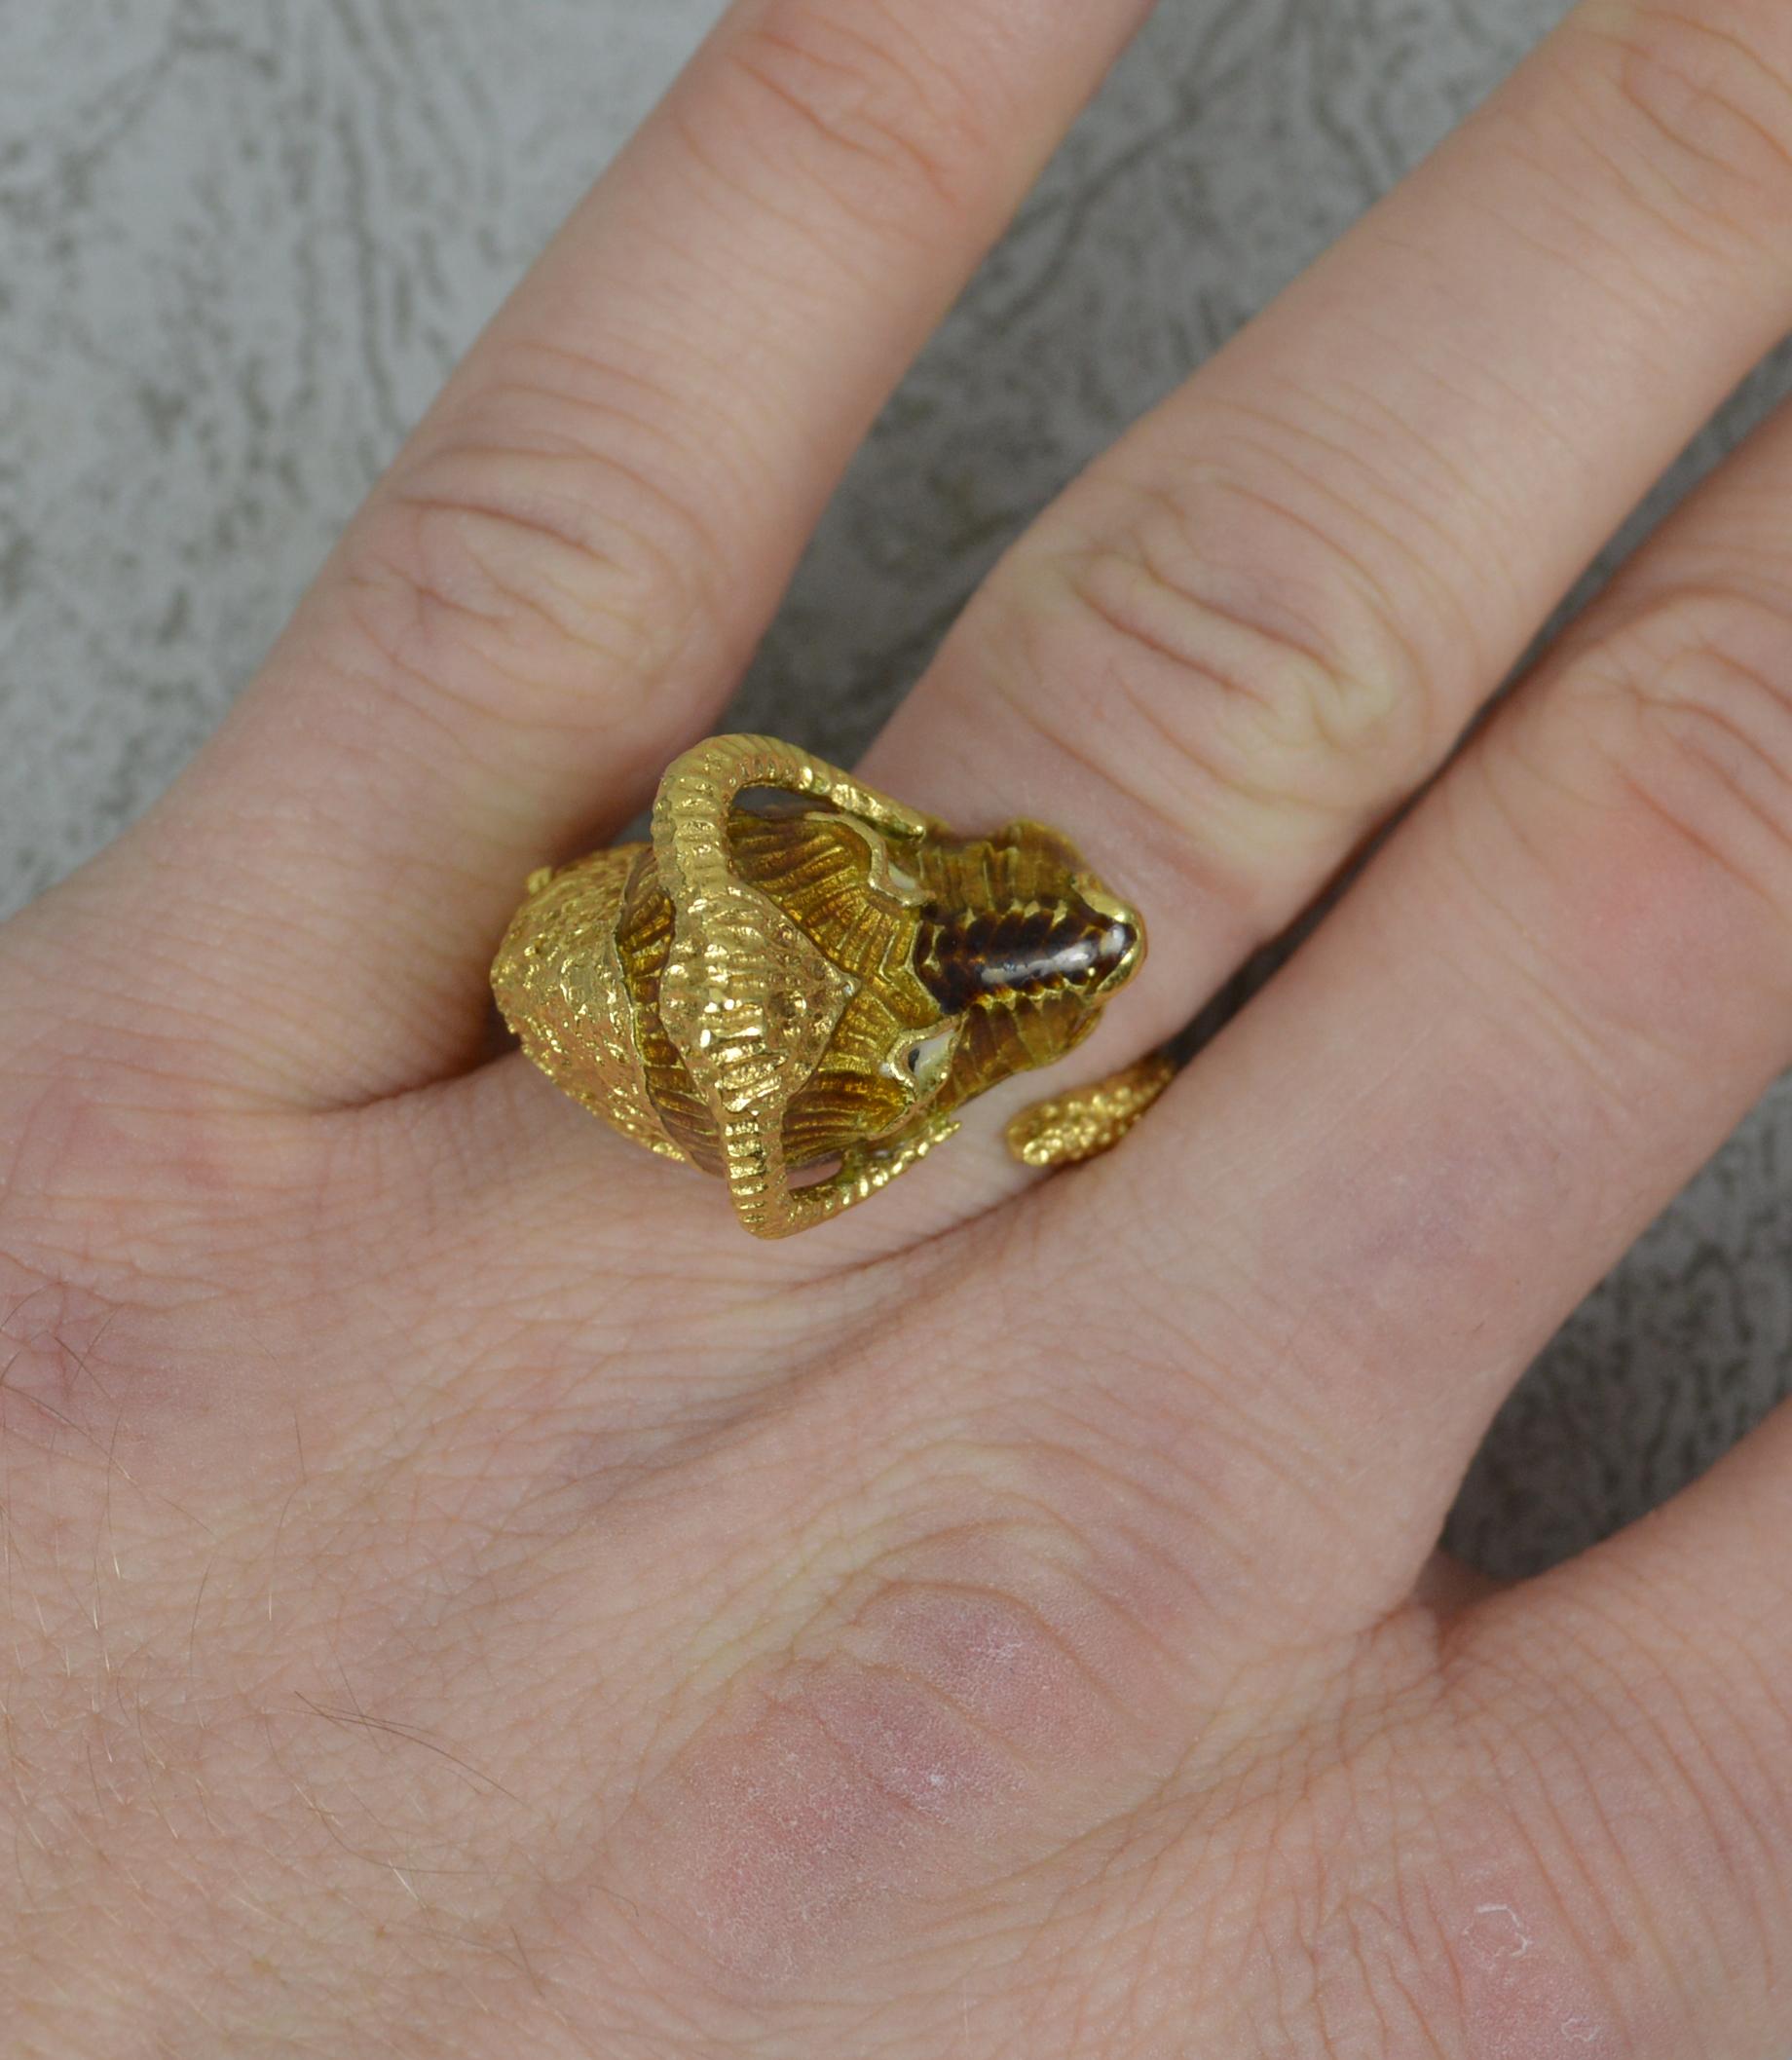 A superb statement ring in the form of a ram.
Solid and heavy 18 carat yellow gold example.
The head realistically modelled as a ram head with enamel and pattern to band throughout.

CONDITION ; Very good. Crisp design. Clean enamel. Issue free.